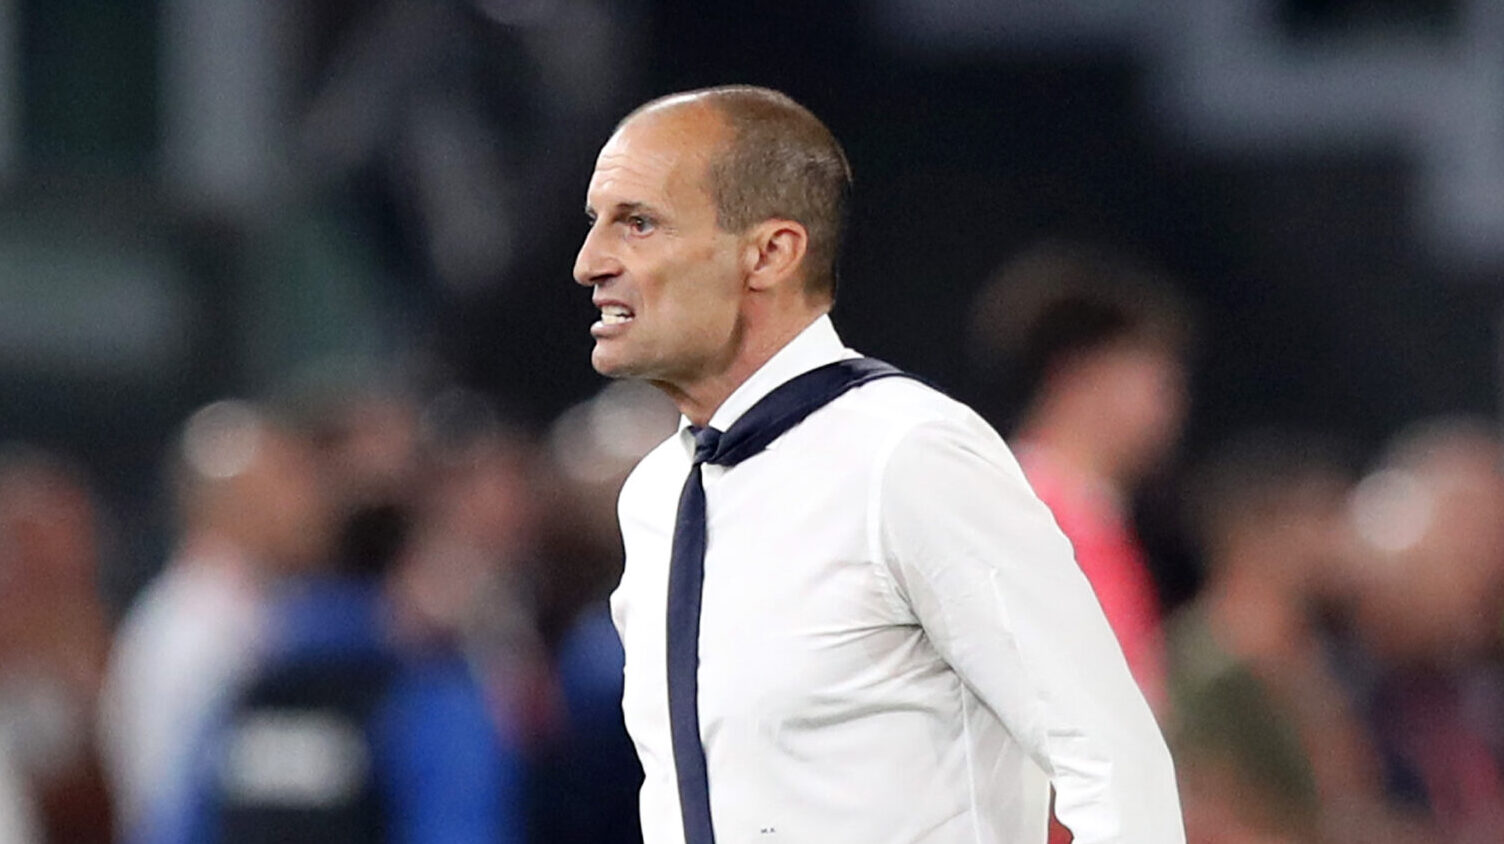 Massimiliano Allegri may have a lot of flaws, but style wasn’t among those, at least until Wednesday. That’s part of what kept him on the Juventus bench.